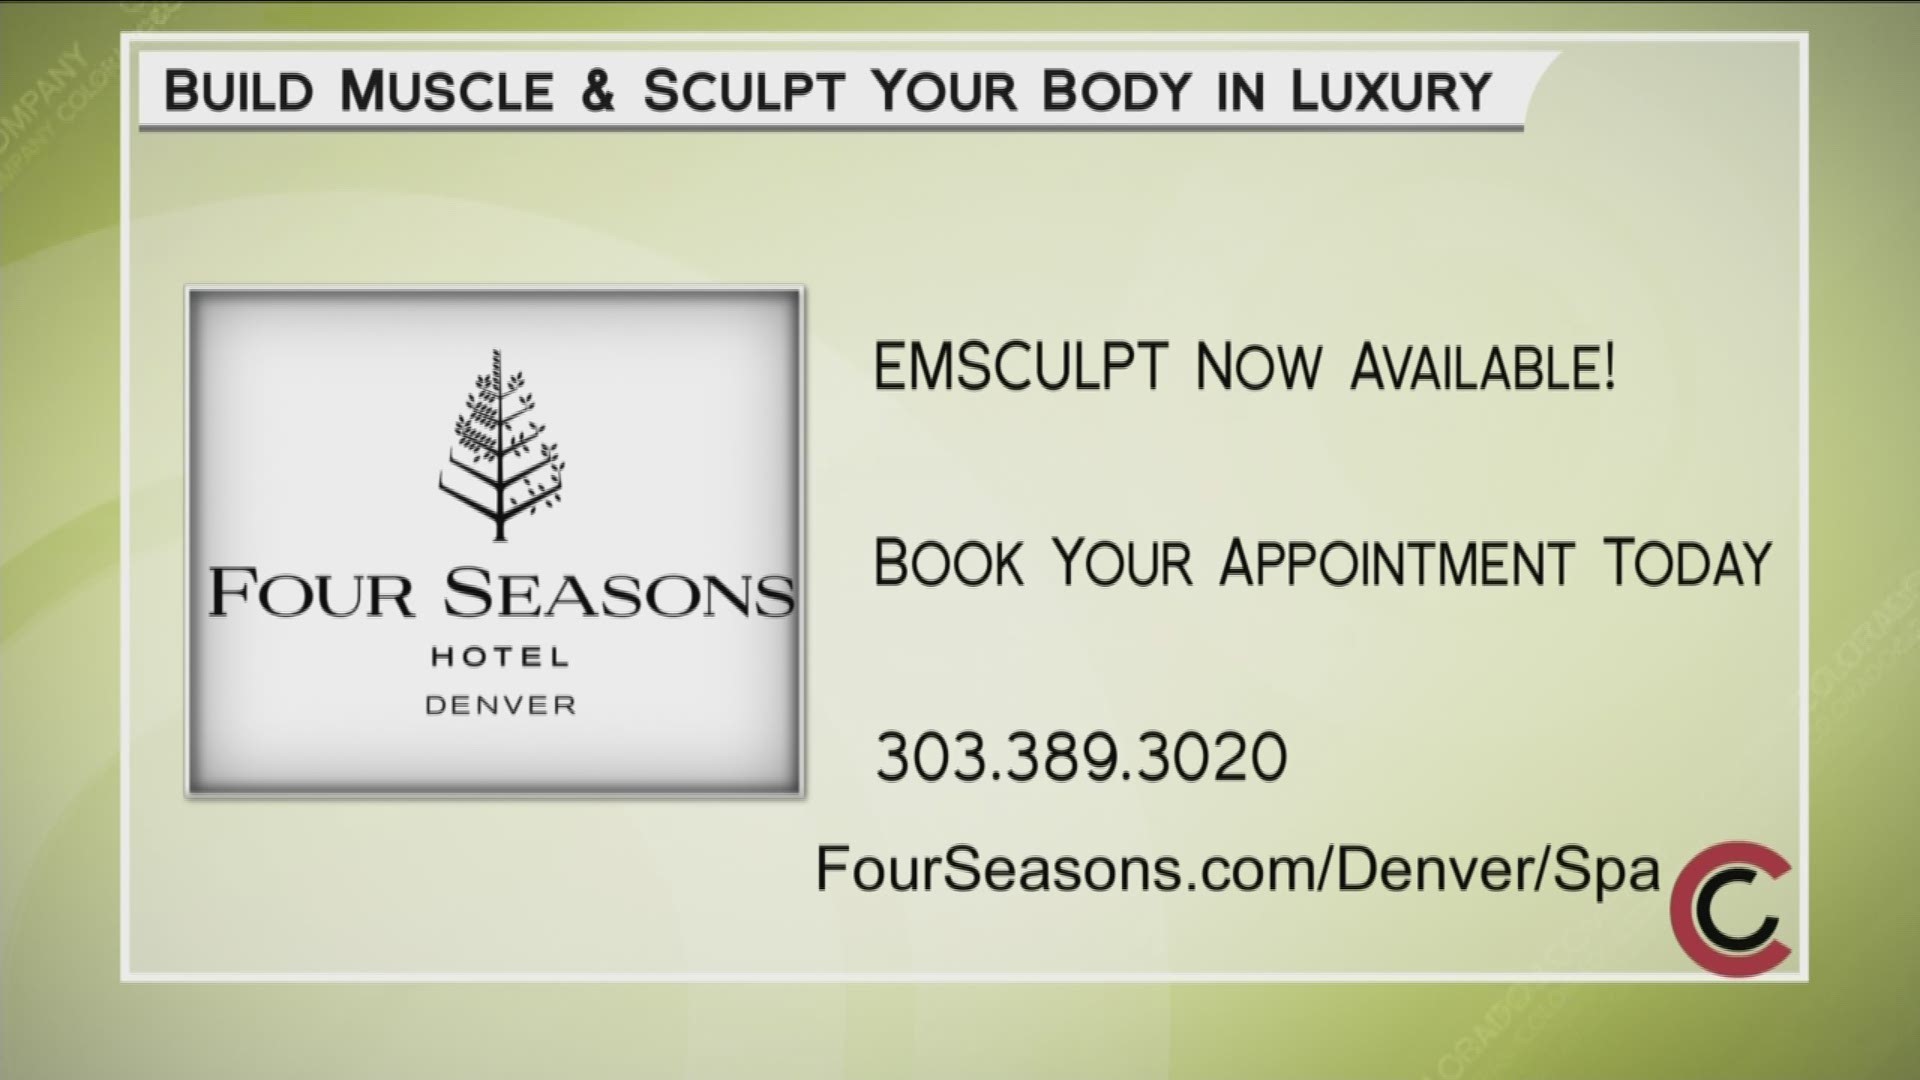 The Spa at Four Seasons Hotel is your spot for luxury aesthetic services. Book your appointment by calling 303.389.3020 or visit FourSeasons.com/Denver/spa.